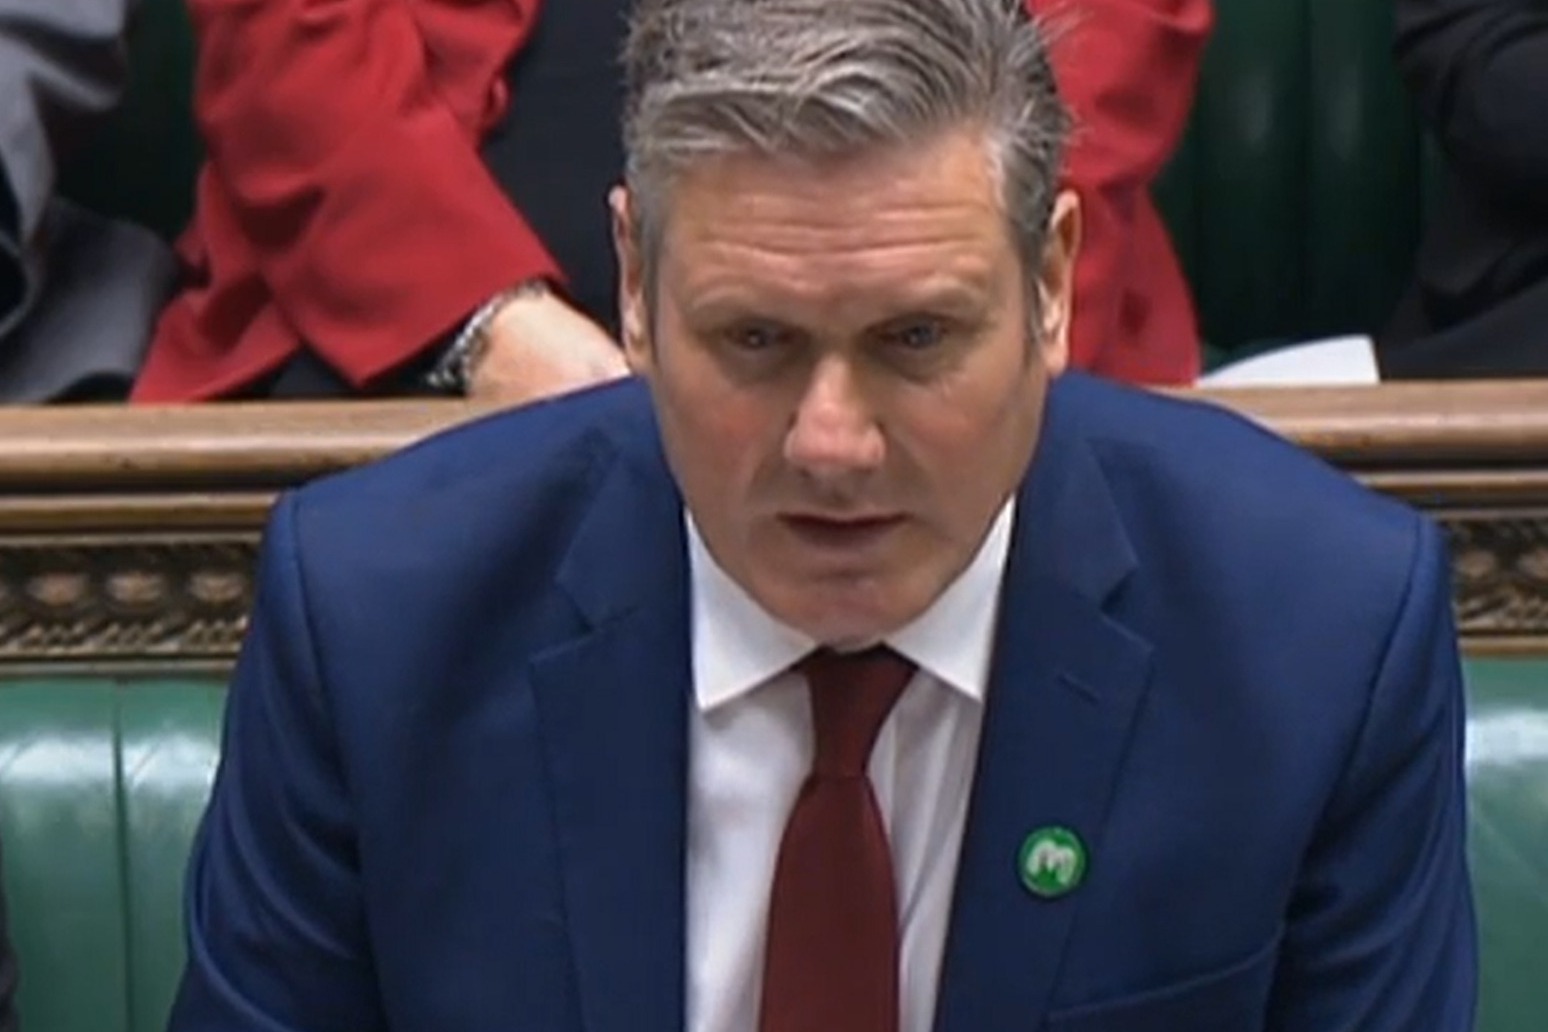 Starmer accuses PM of ‘hammering’ working people over tax hike 